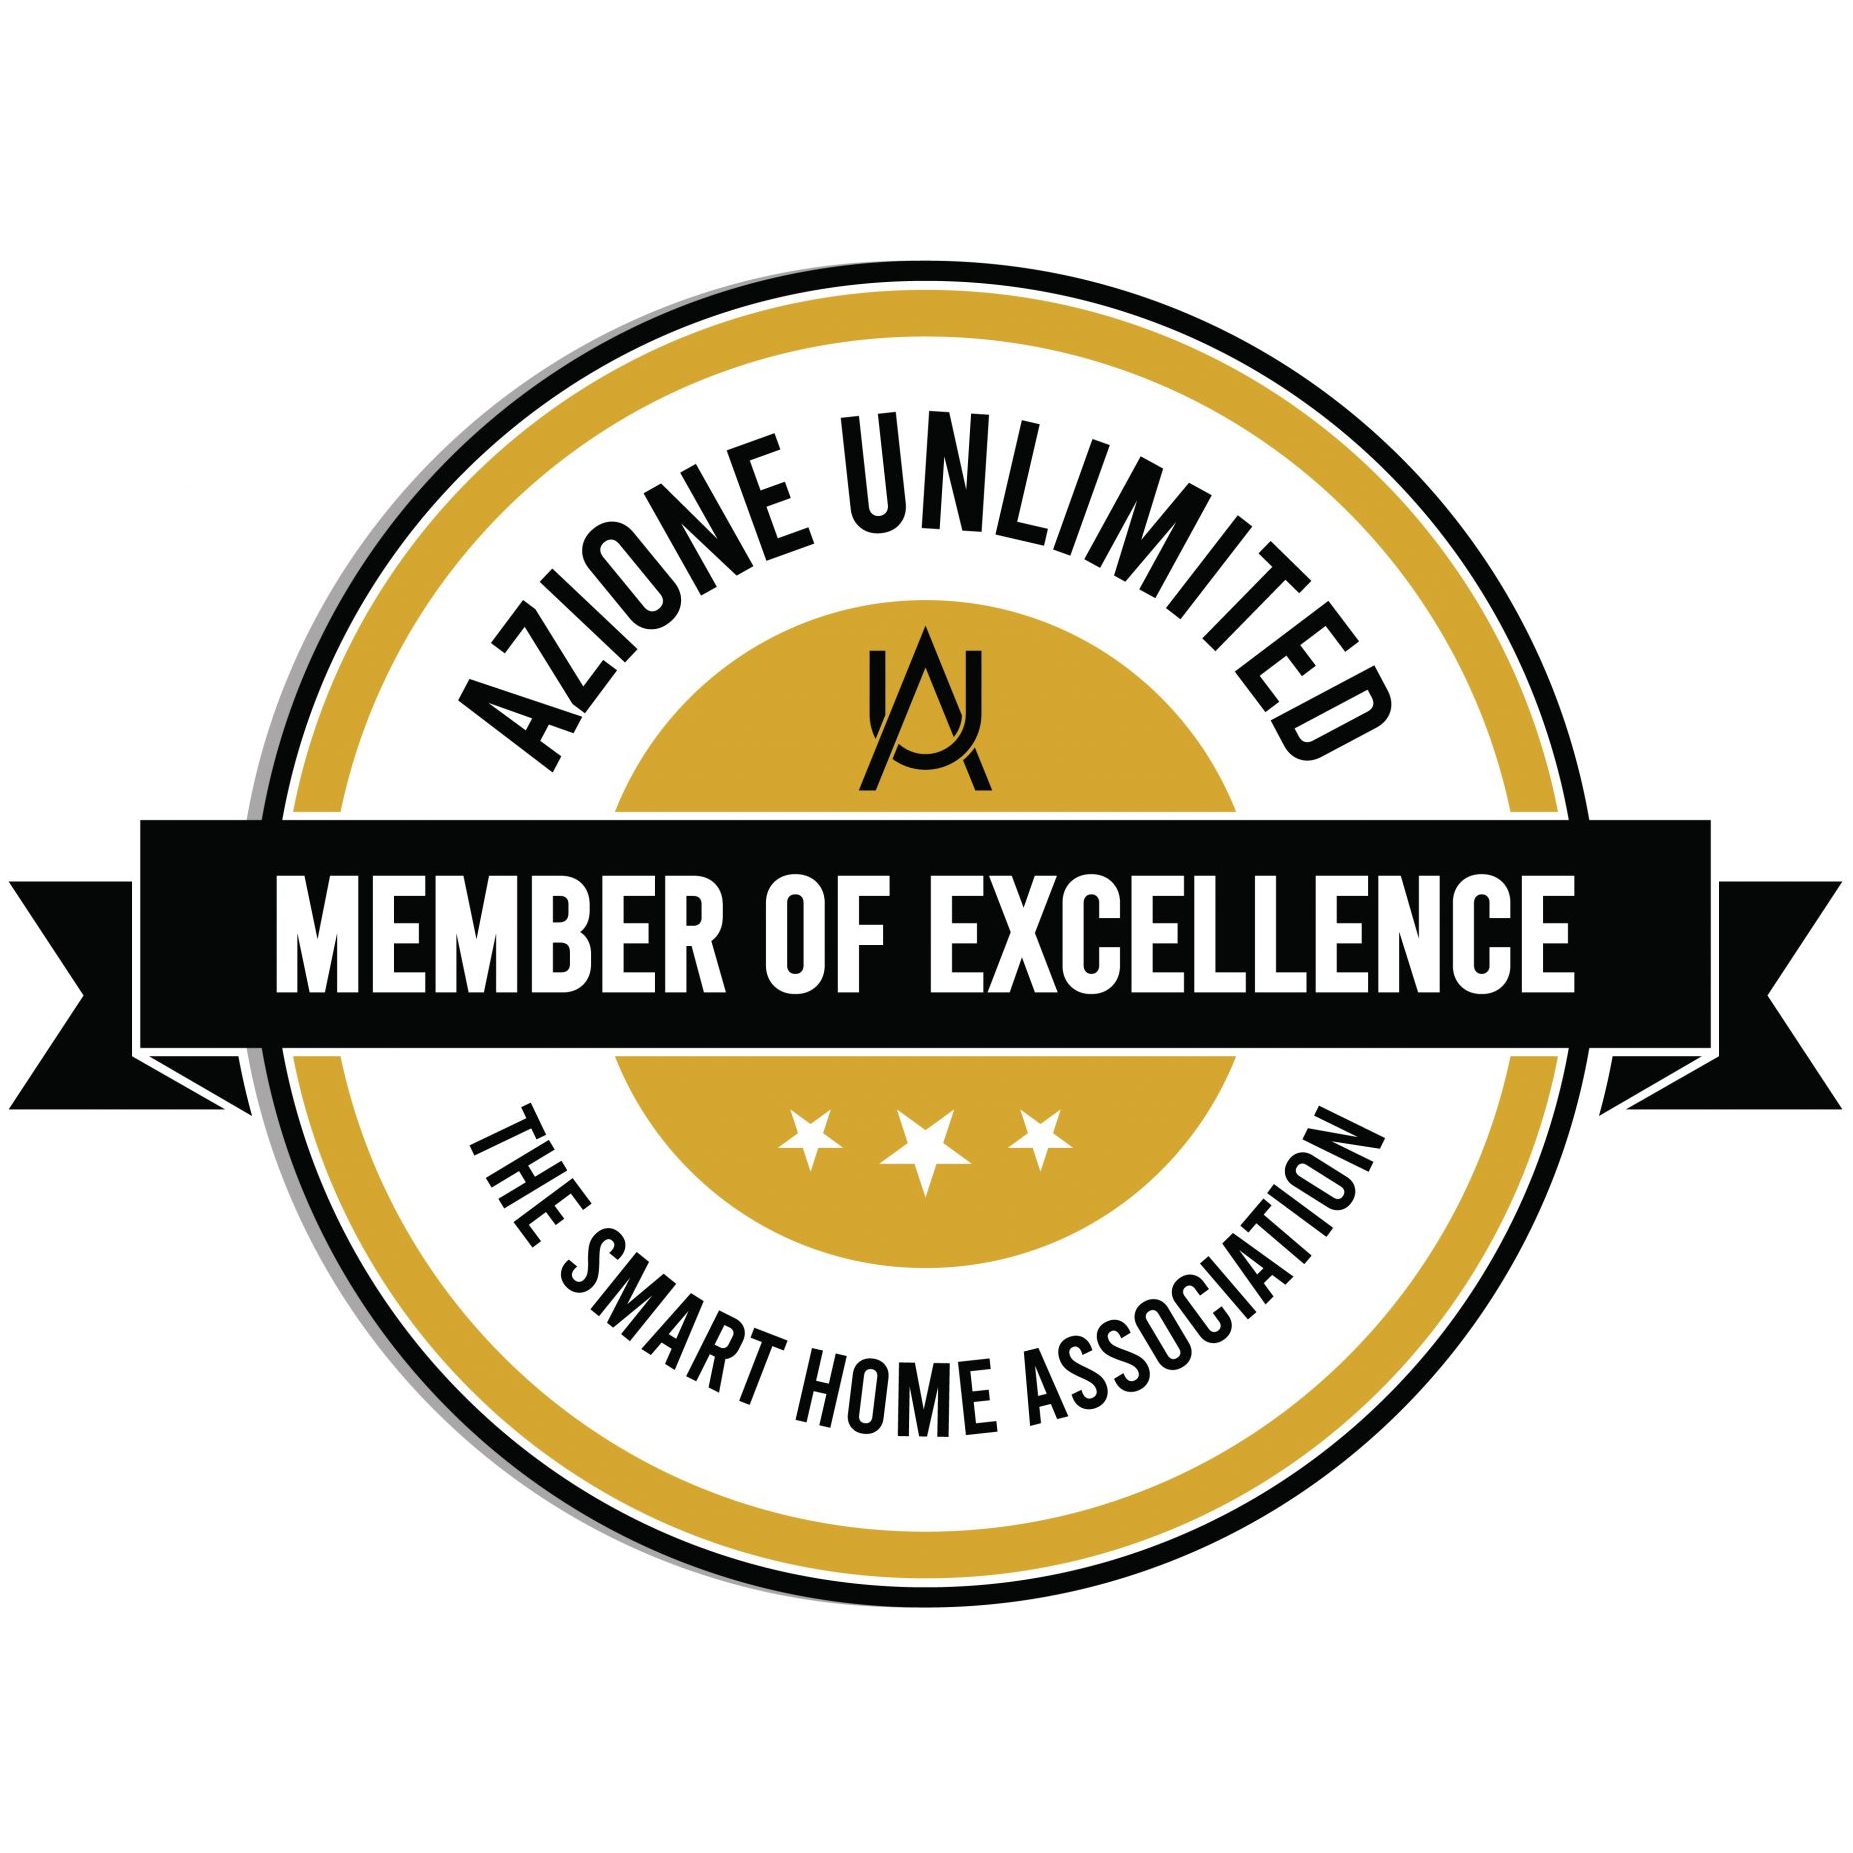 Azione Unlimited Member of Excellence